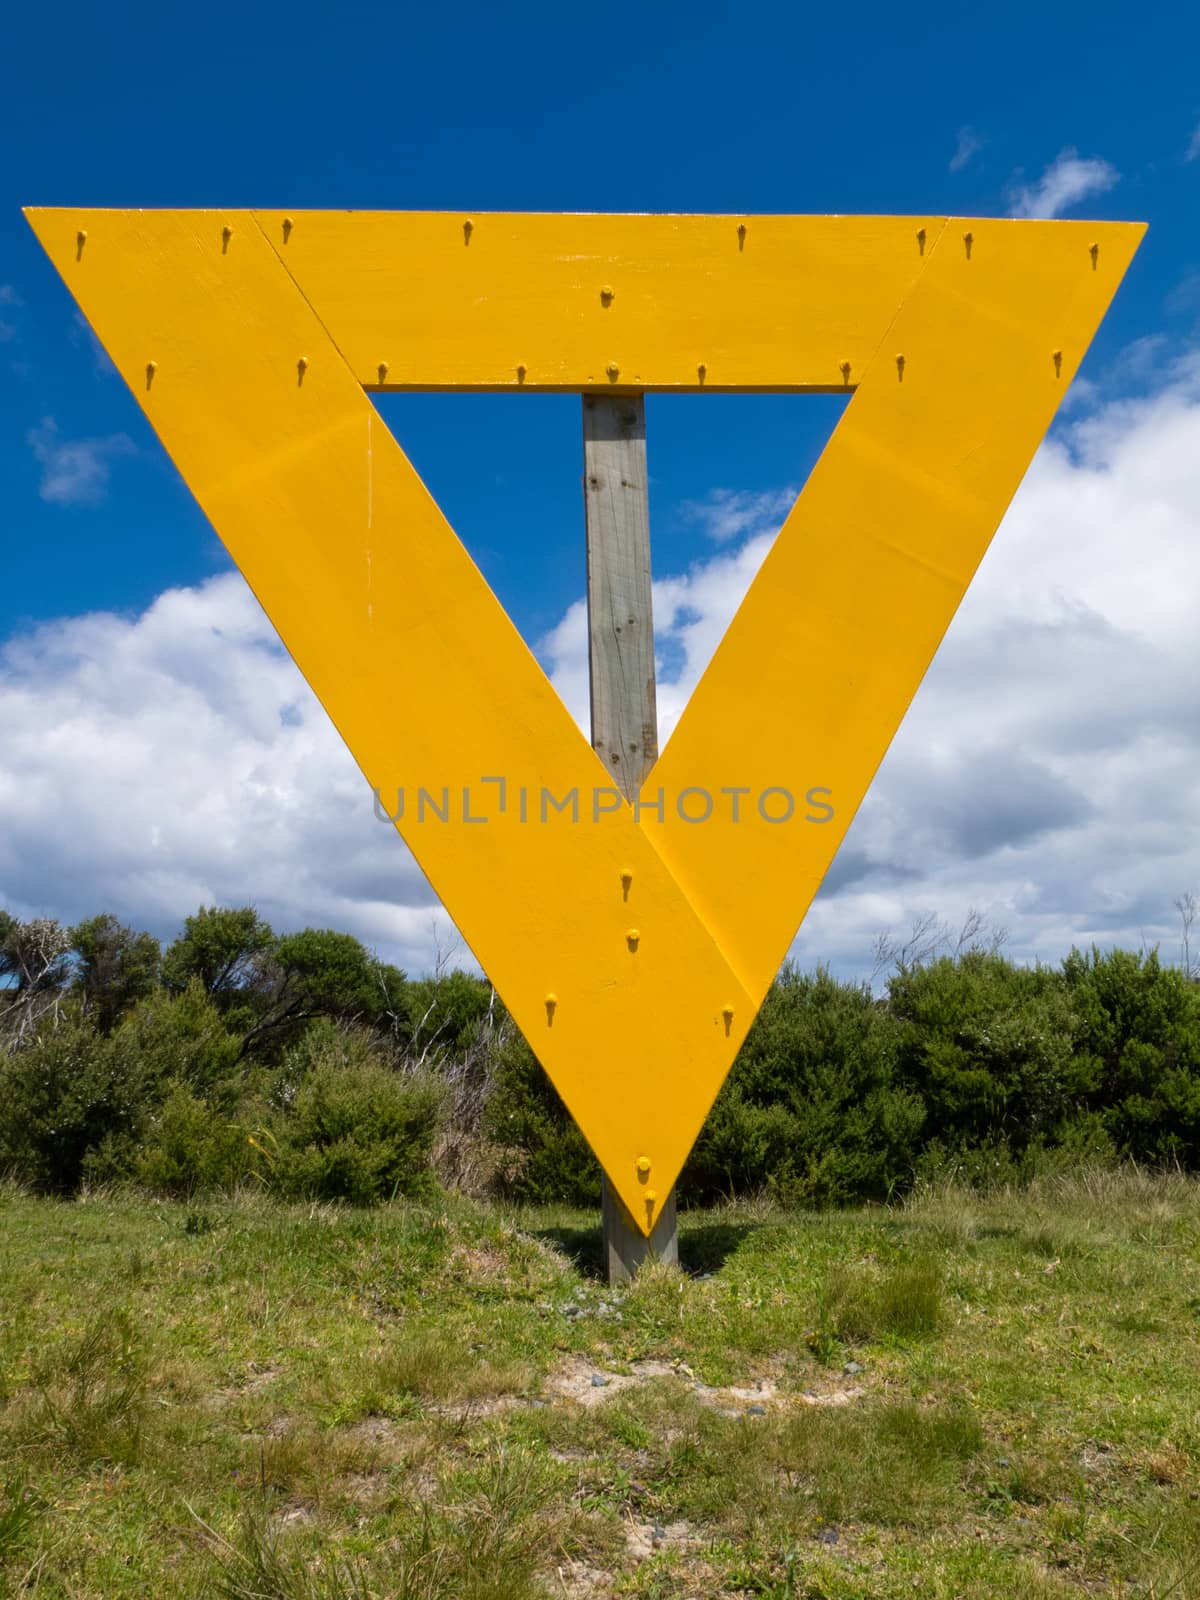 Strange yellow triangle sign on wooden post in coastal countryside landscape used as landmark orientation for shipping navigation